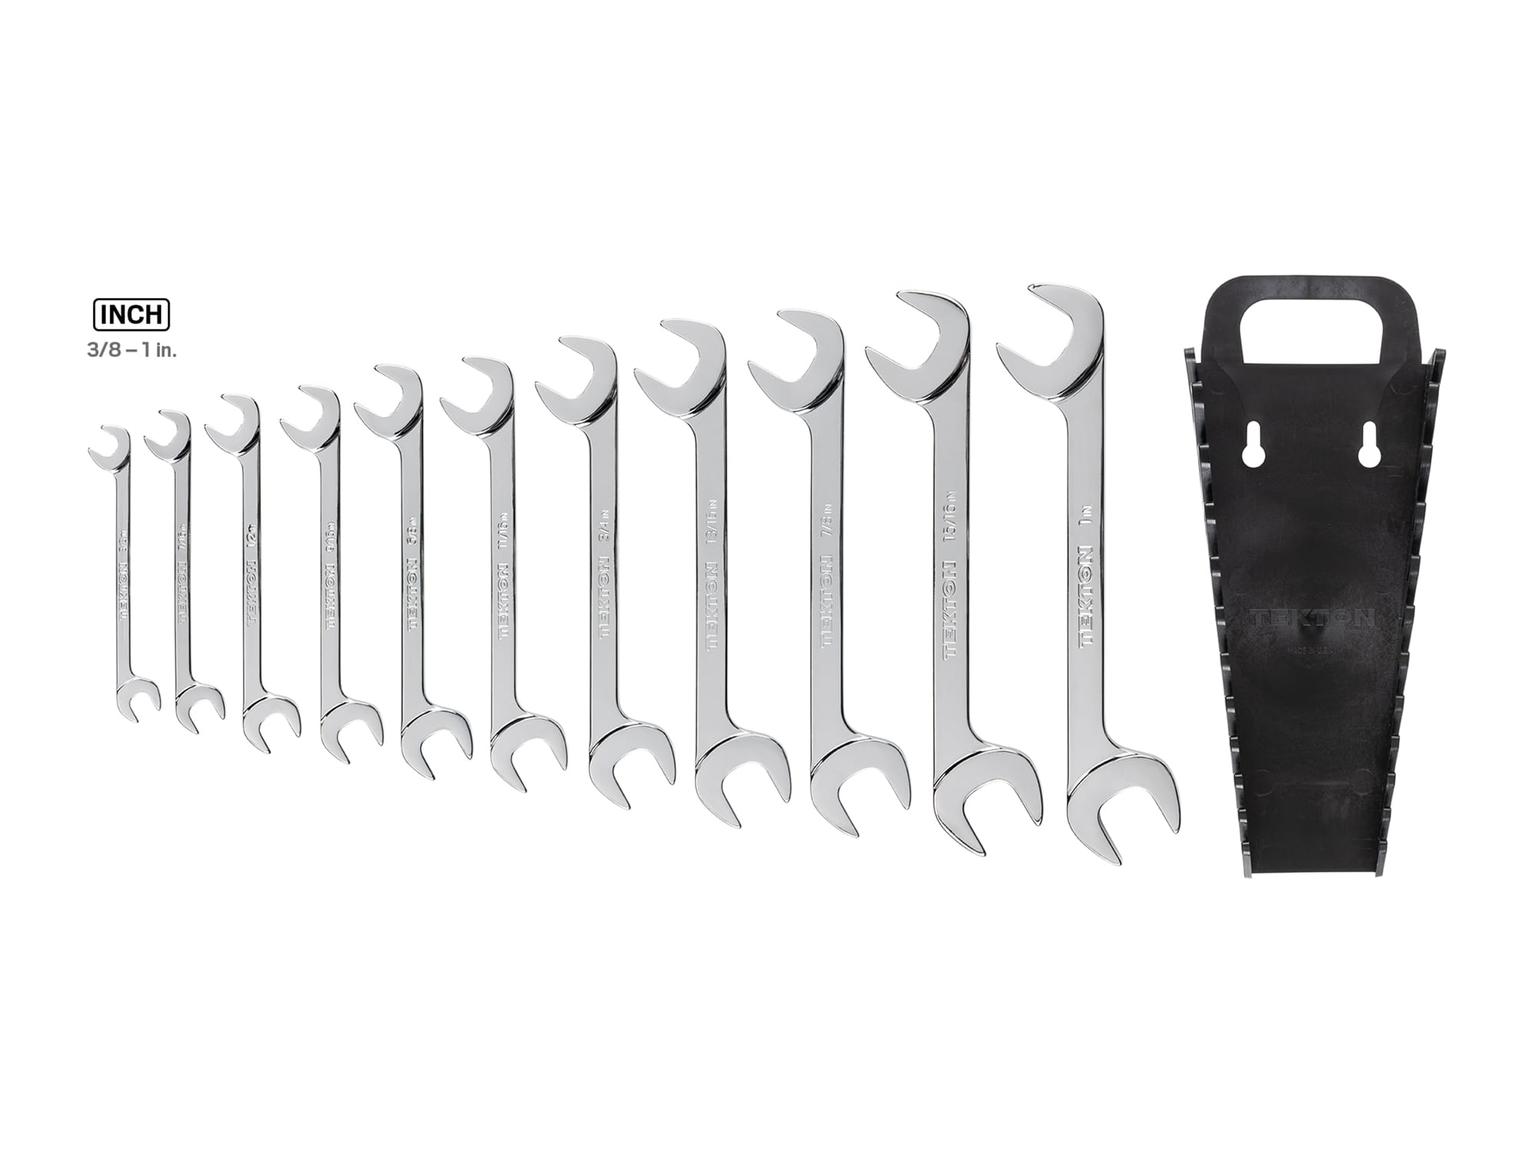 TEKTON WAE91102-T Angle Head Open End Wrench Set with Holder, 11-Piece (3/8 - 1 in.)